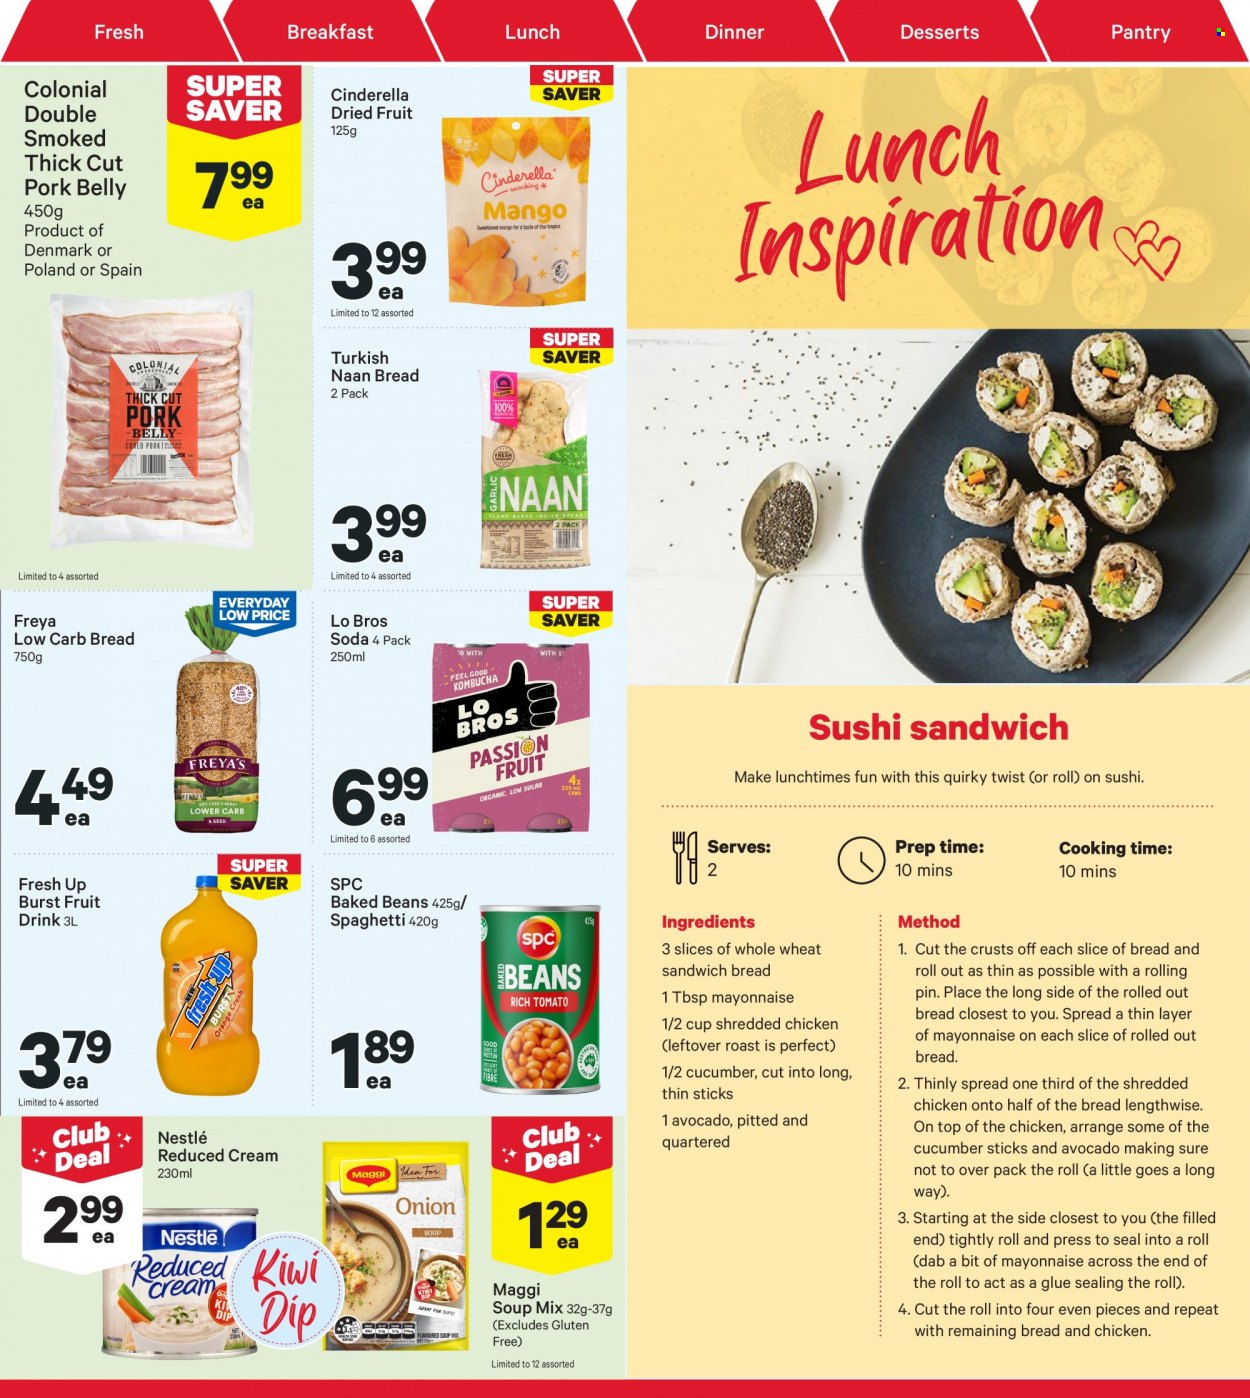 thumbnail - New World mailer - 28.11.2022 - 04.12.2022 - Sales products - kiwi, spaghetti, soup mix, soup, mayonnaise, Nestlé, Maggi, baked beans, dried fruit, fruit drink, soda, pork belly, pork meat, Sure, cup, pin, glue. Page 15.